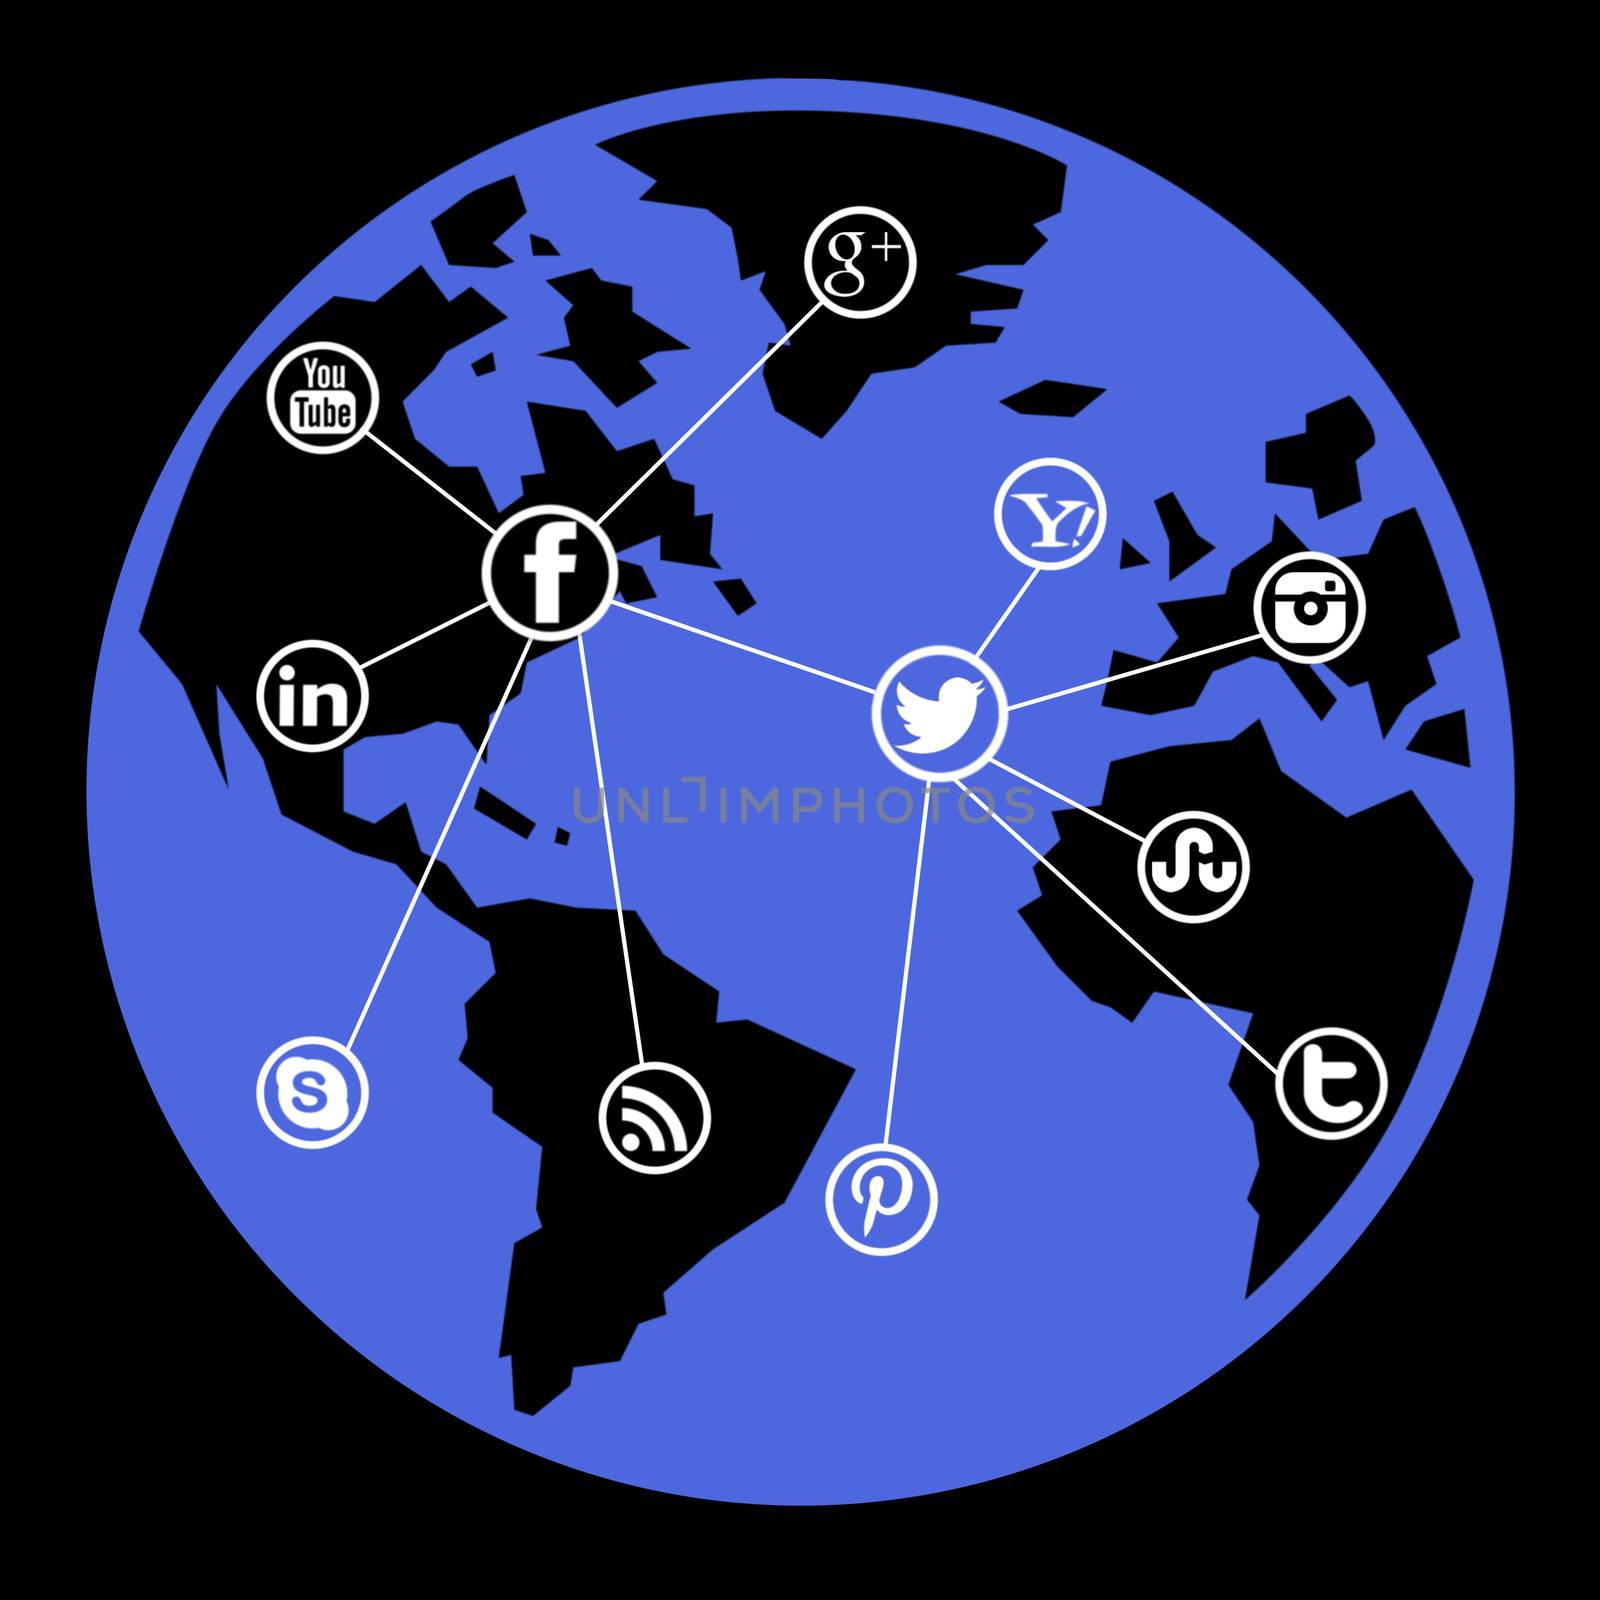 Social media network connections around the world